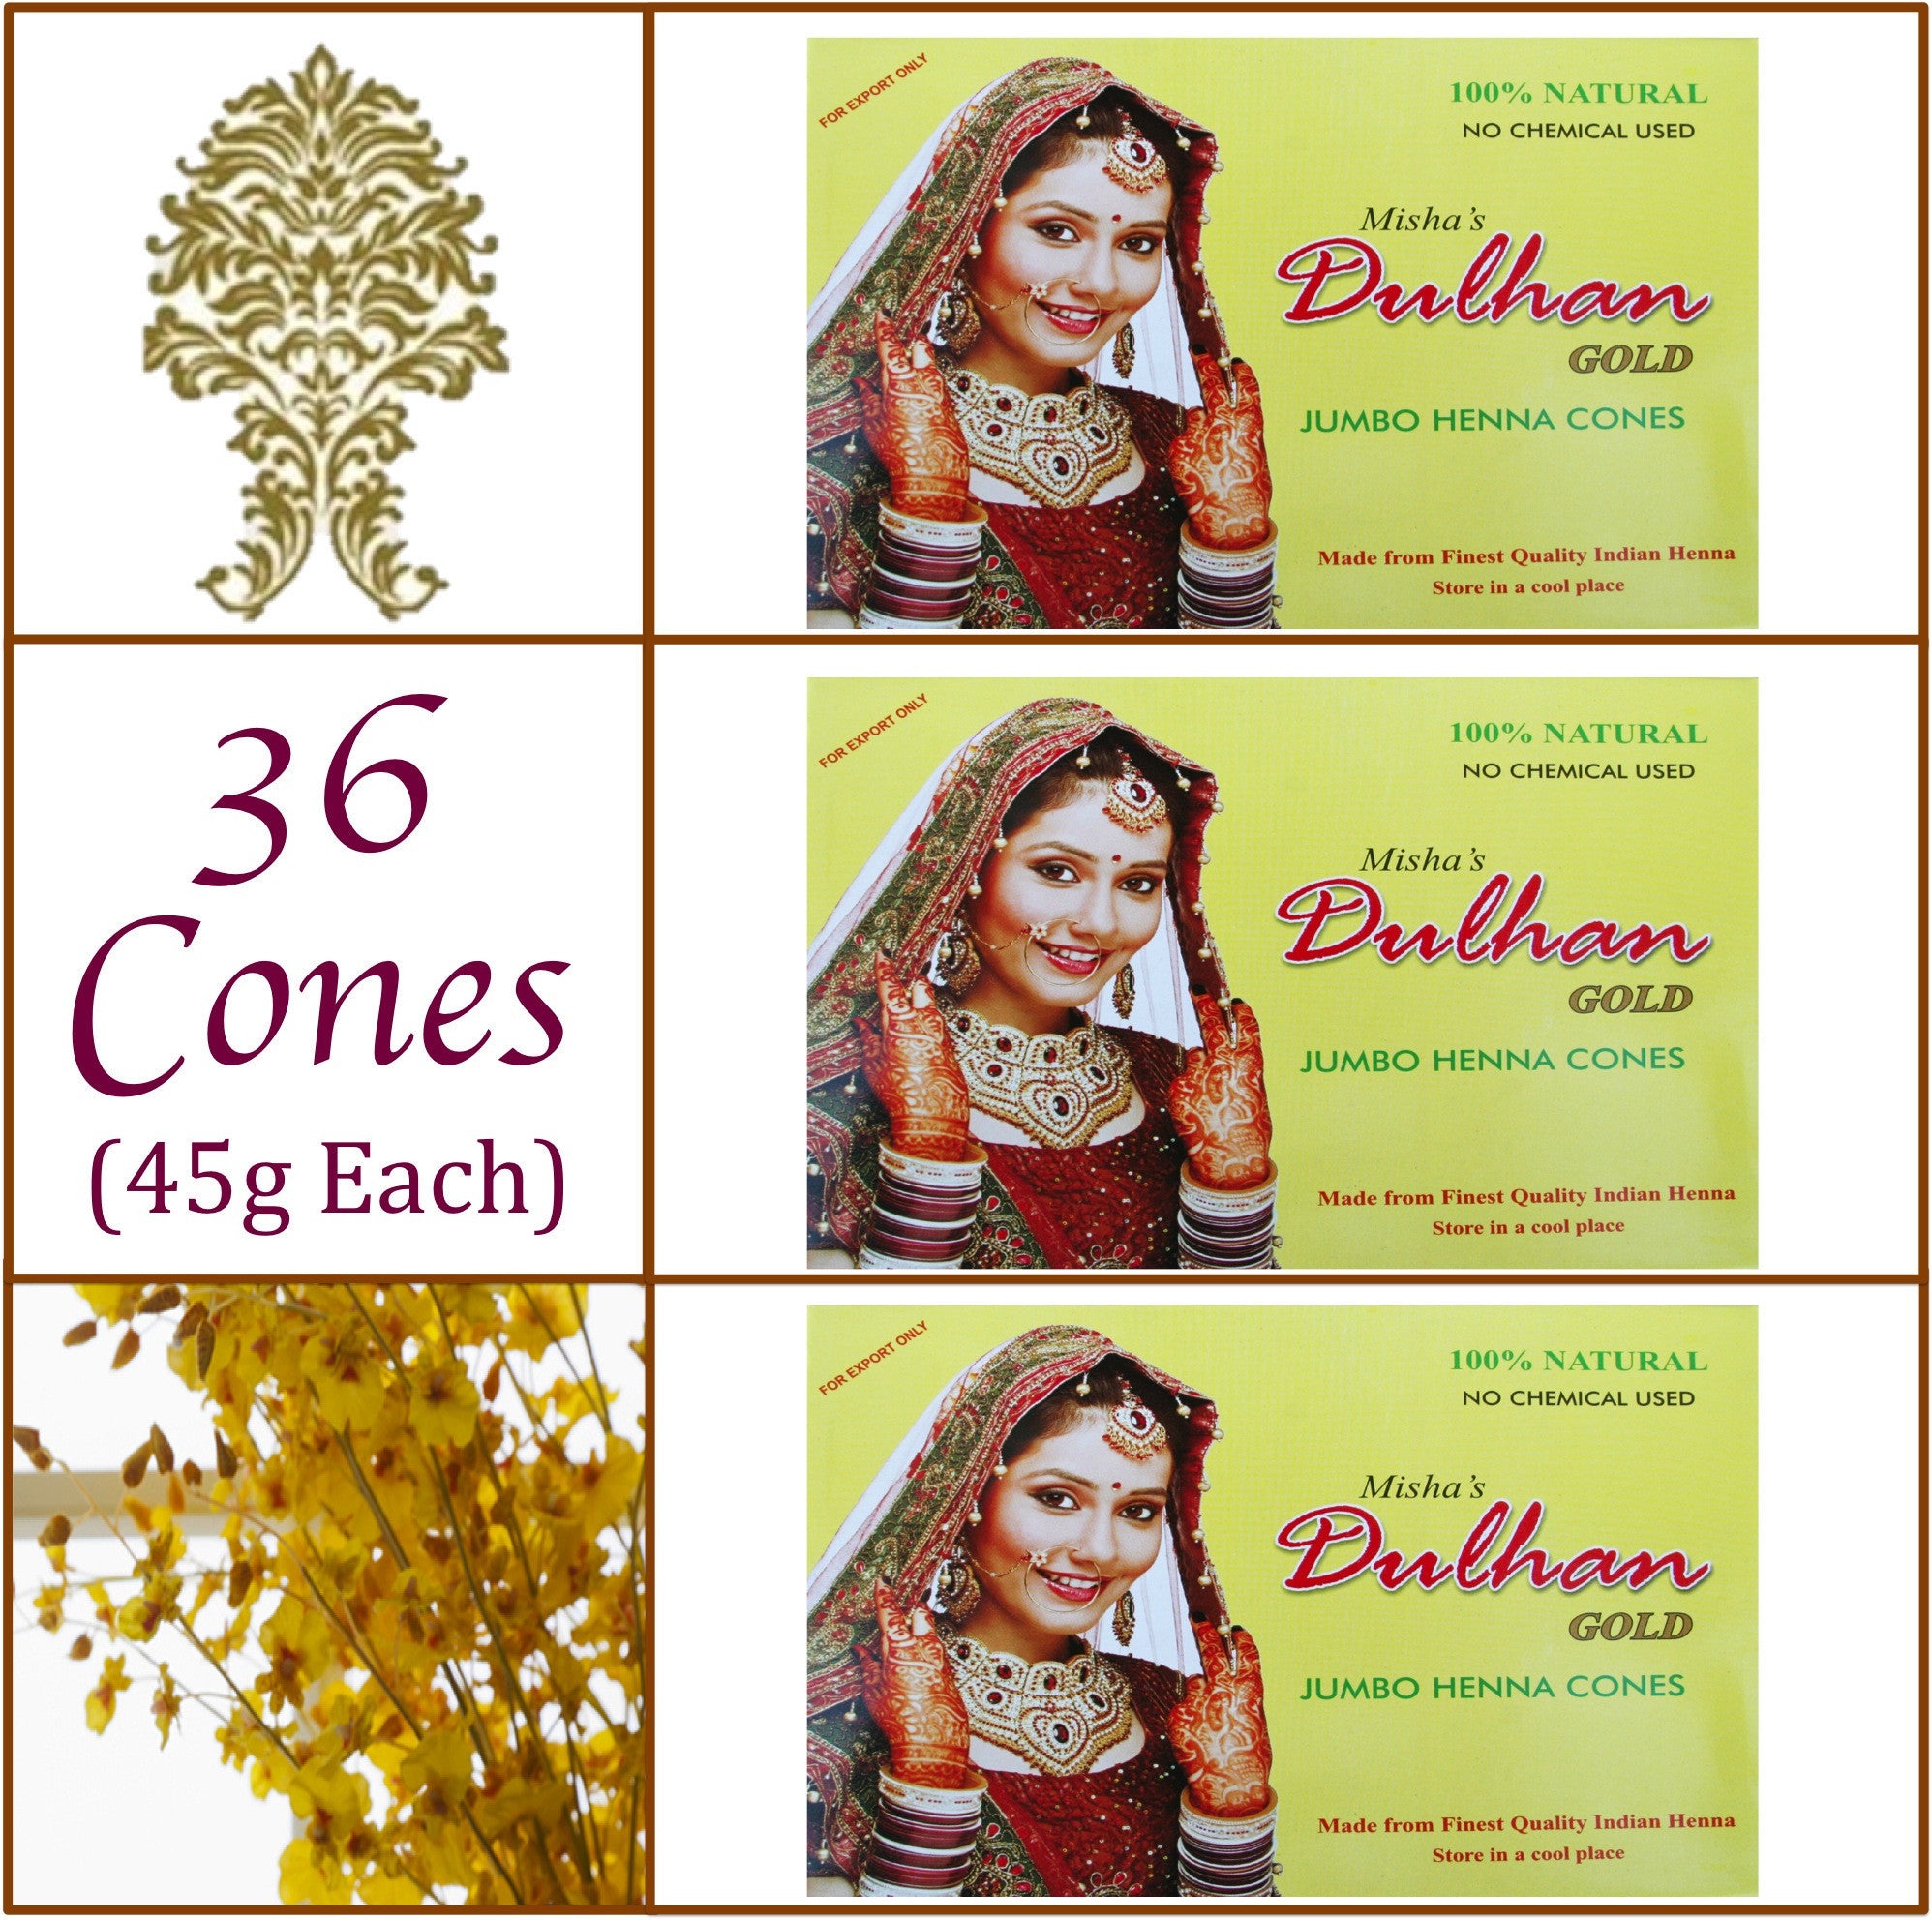 3 Boxes. Dulhan Gold Henna Paste. 36 Jumbo Cones, 45g Ea.